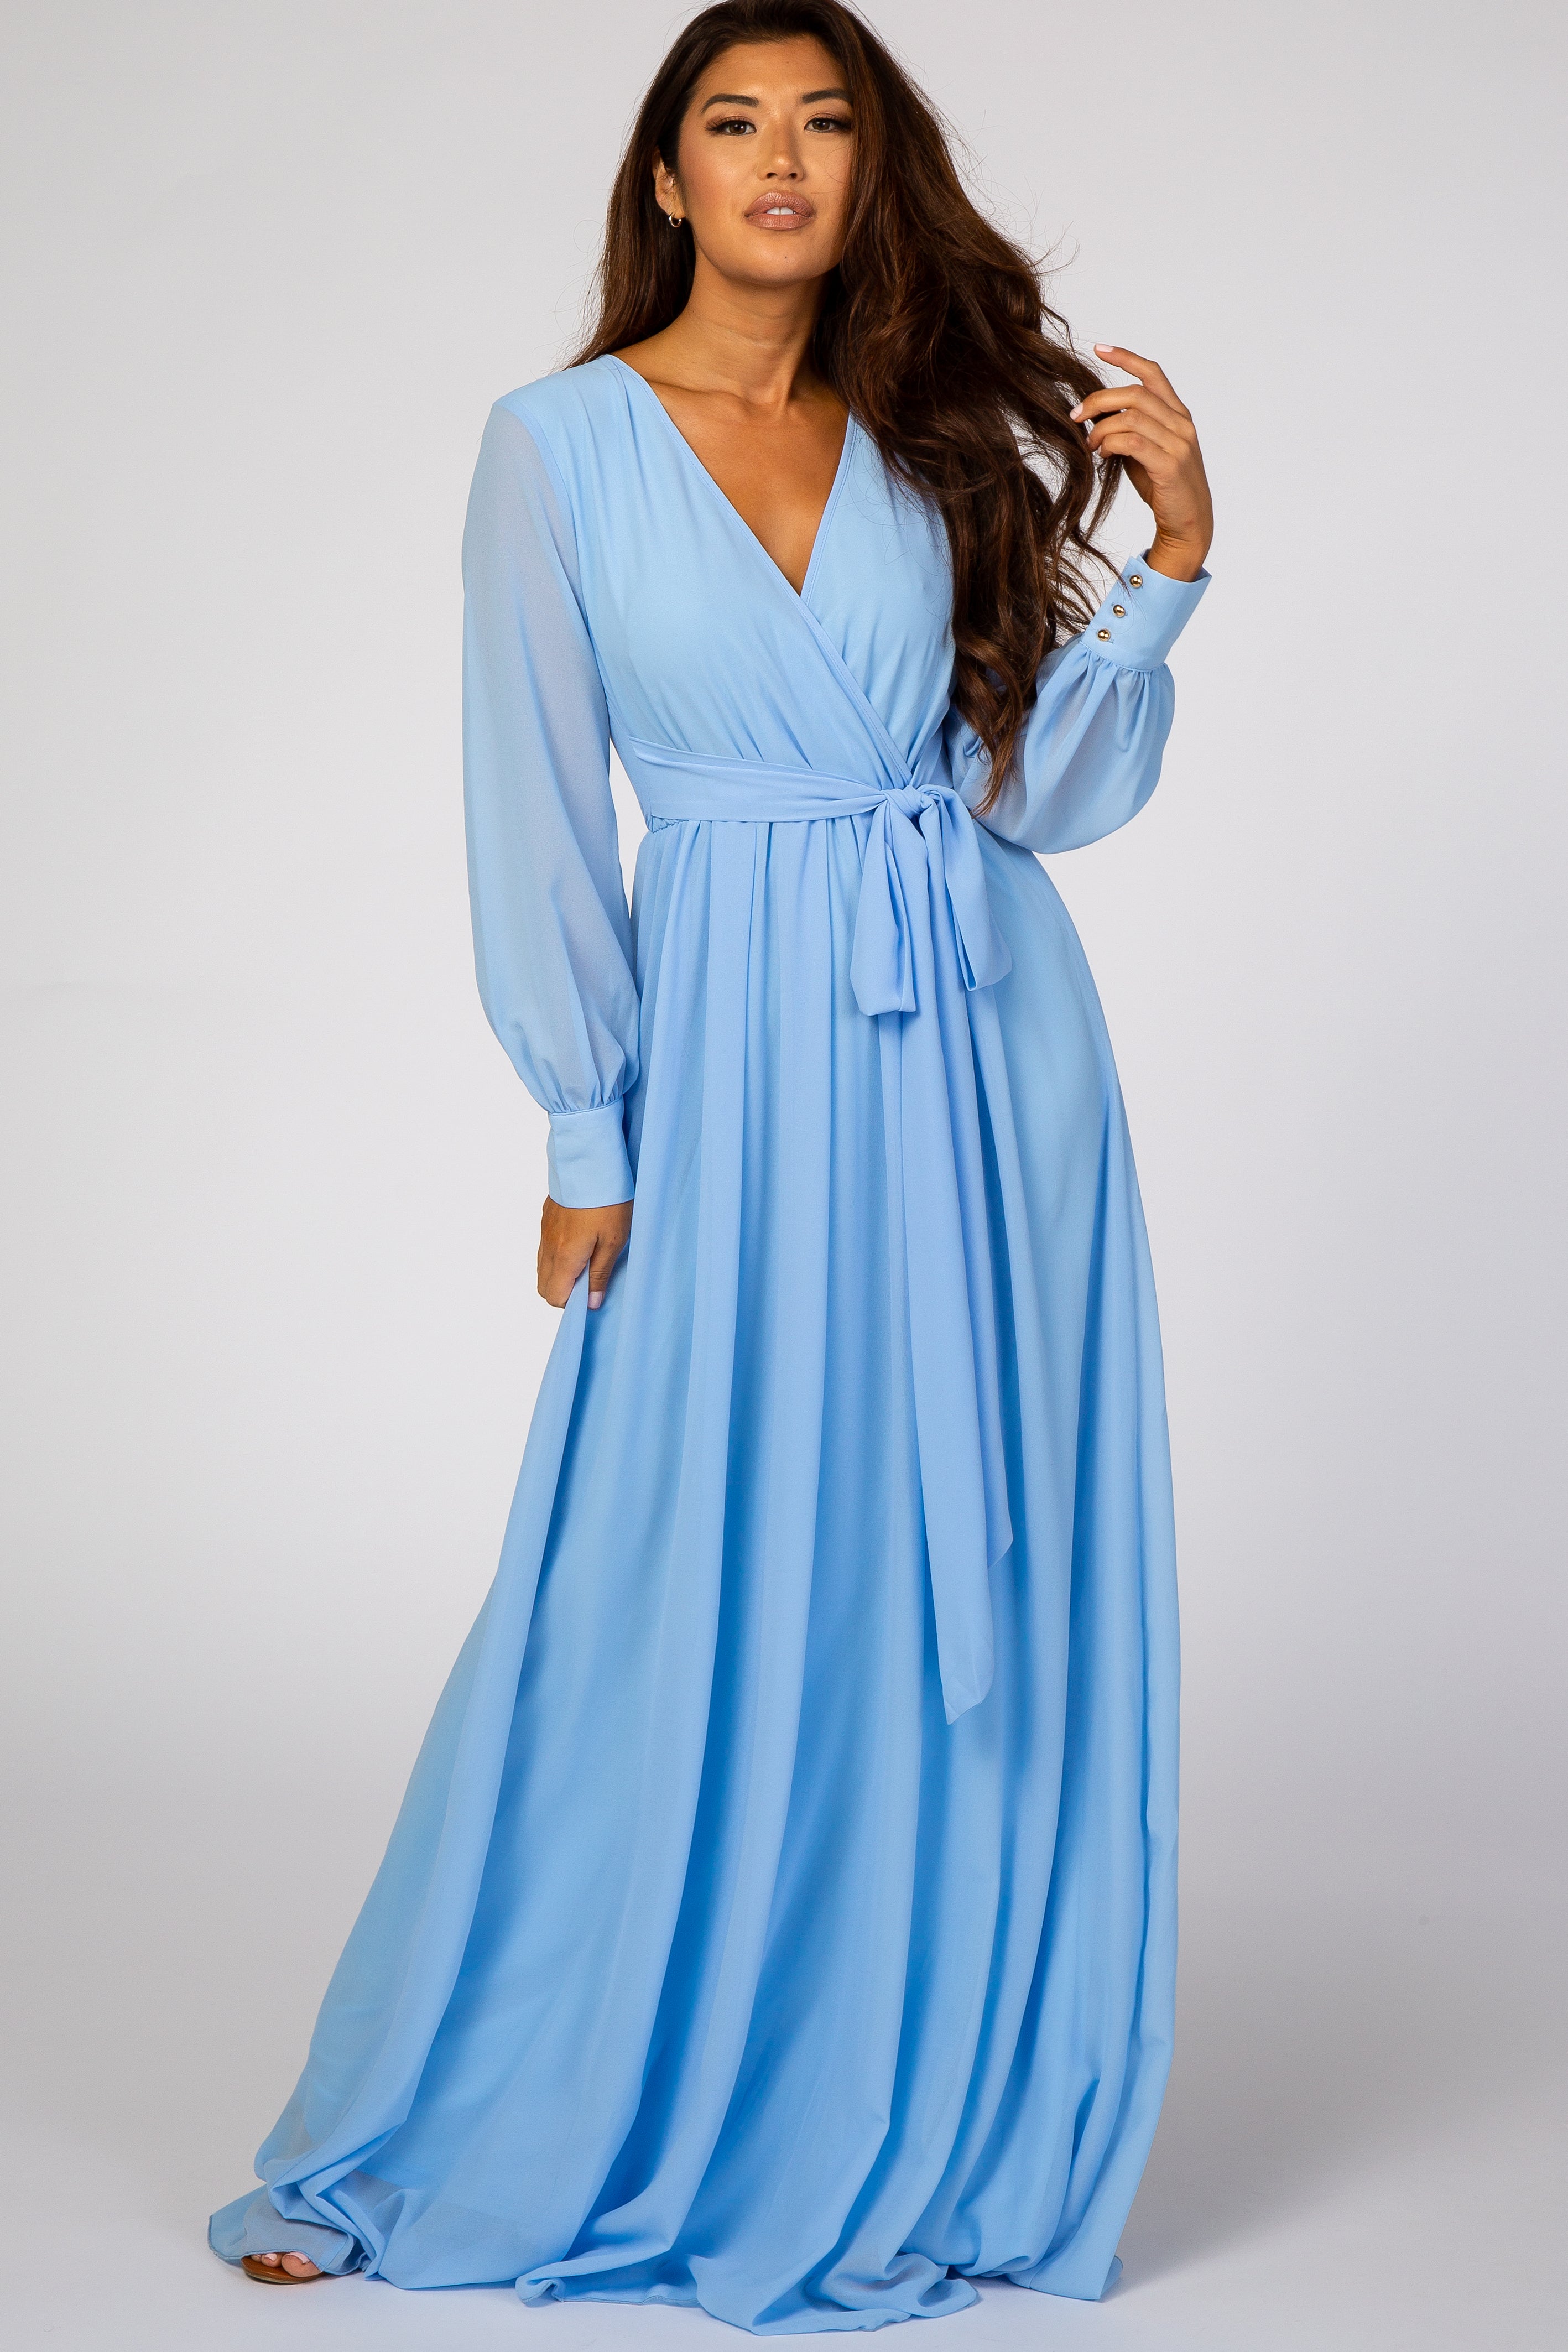 Shop Exquisite Long Sleeve Prom Dresses Now! - The Dress Outlet